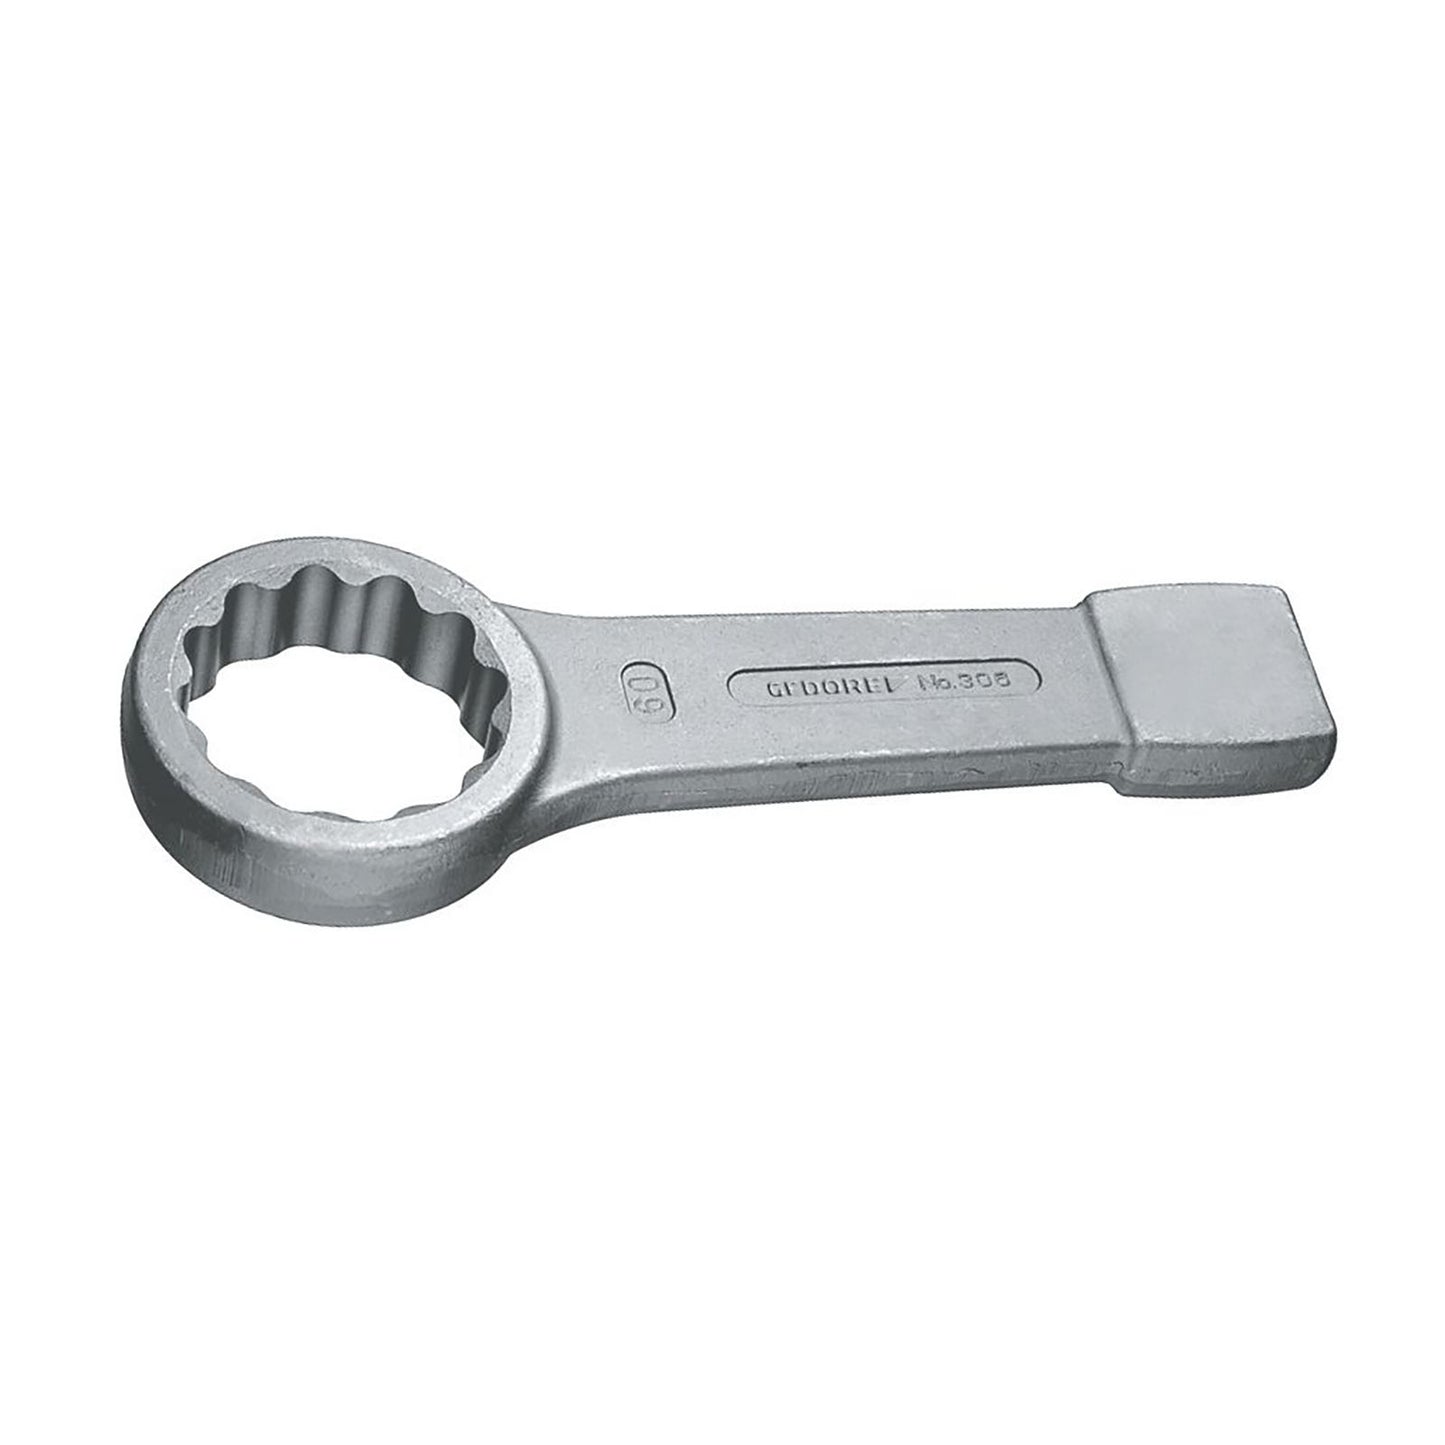 GEDORE 306 60 - Closed Strike Wrench, 60mm (6476080)